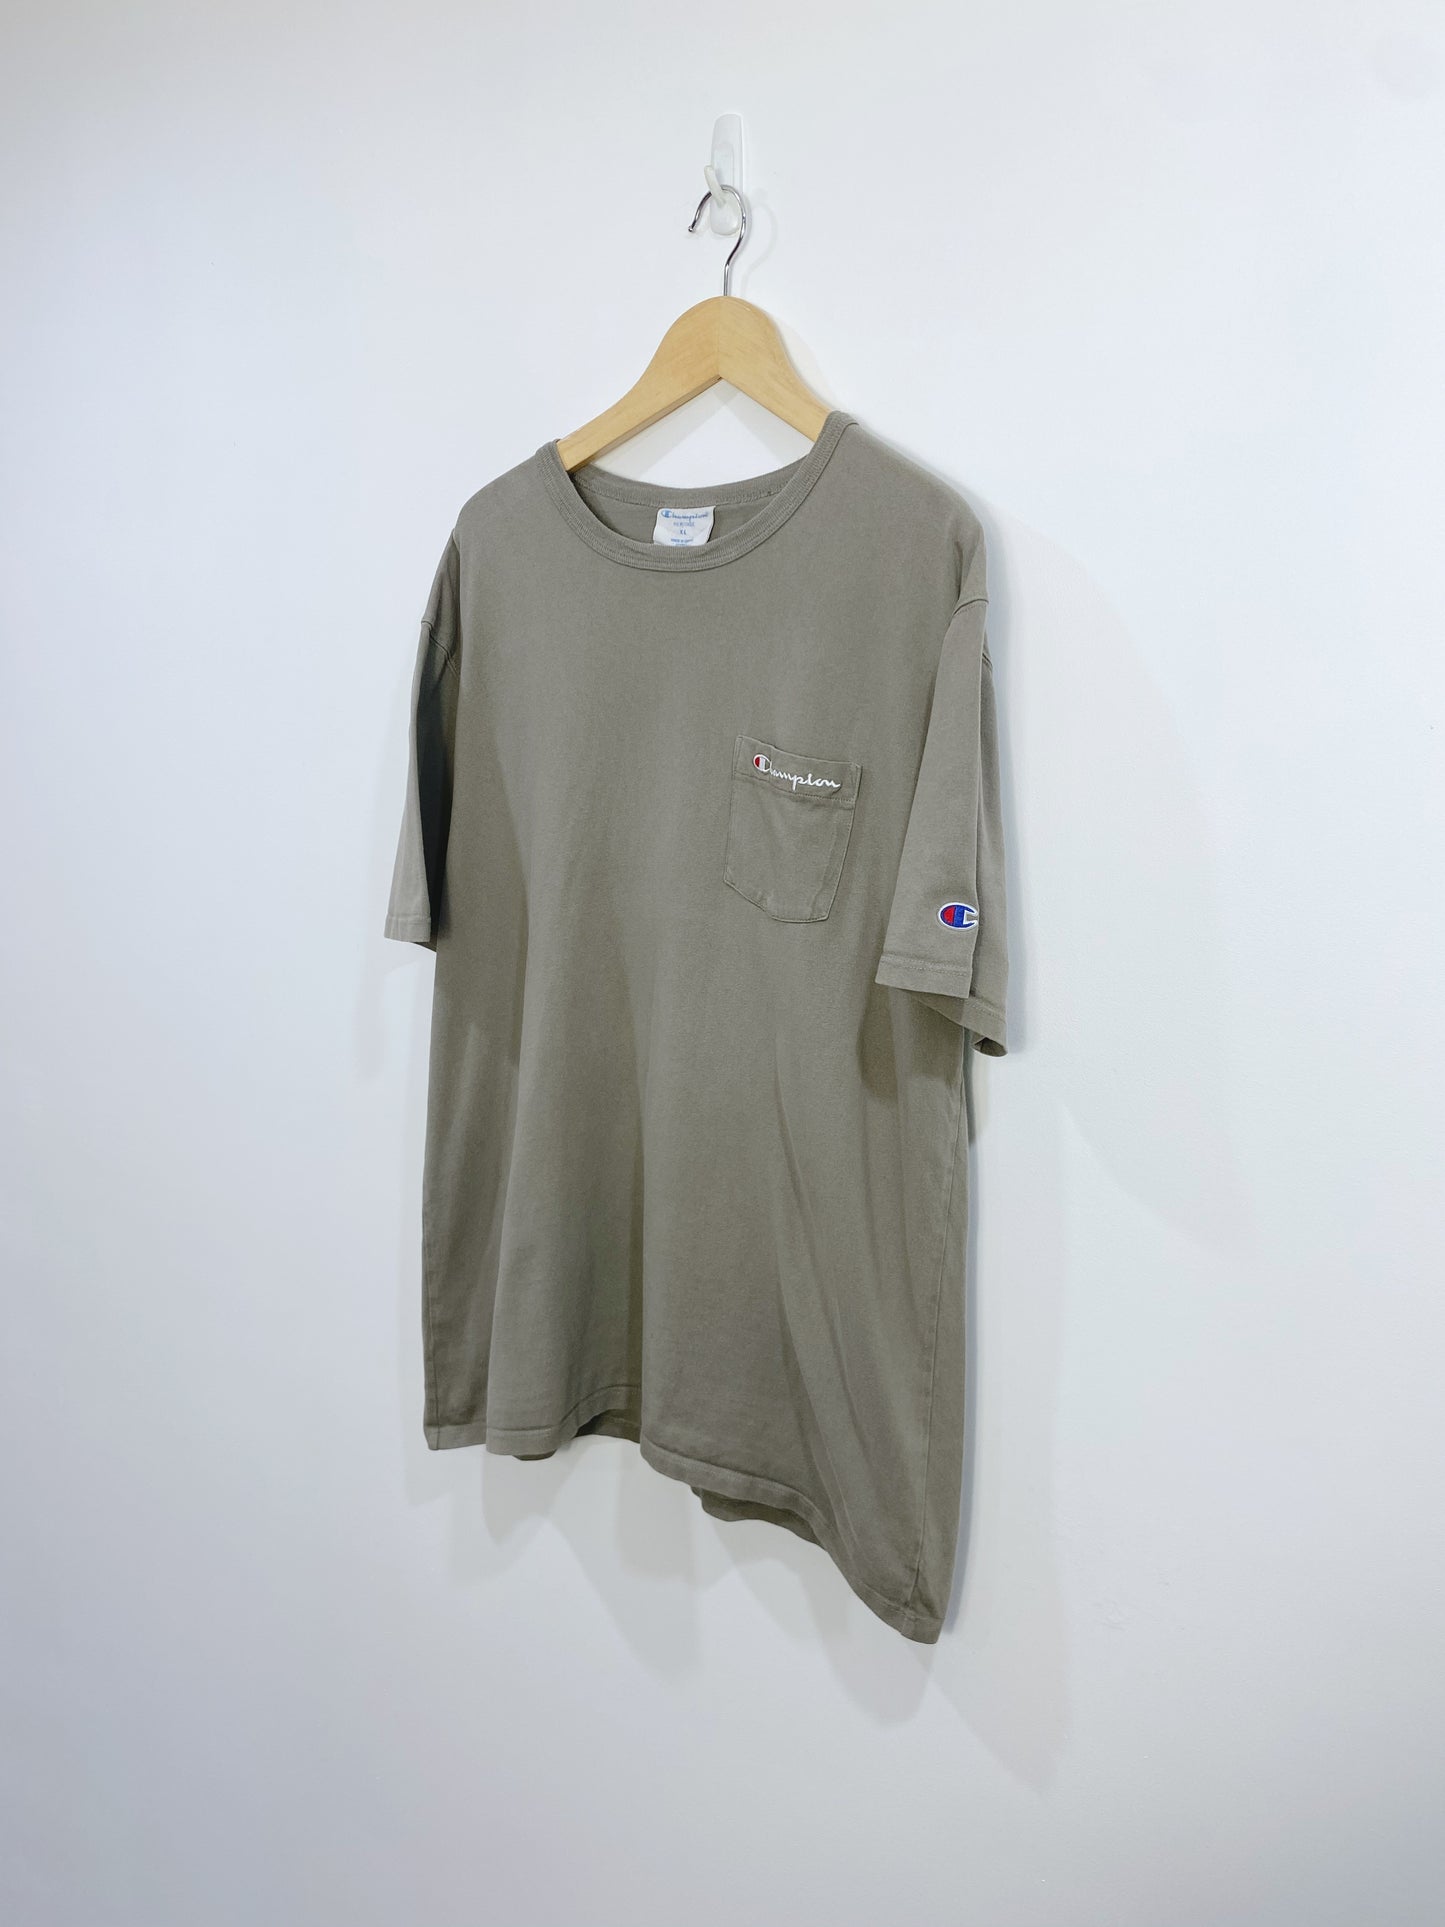 Vintage Champion Embroidered T-shirt L